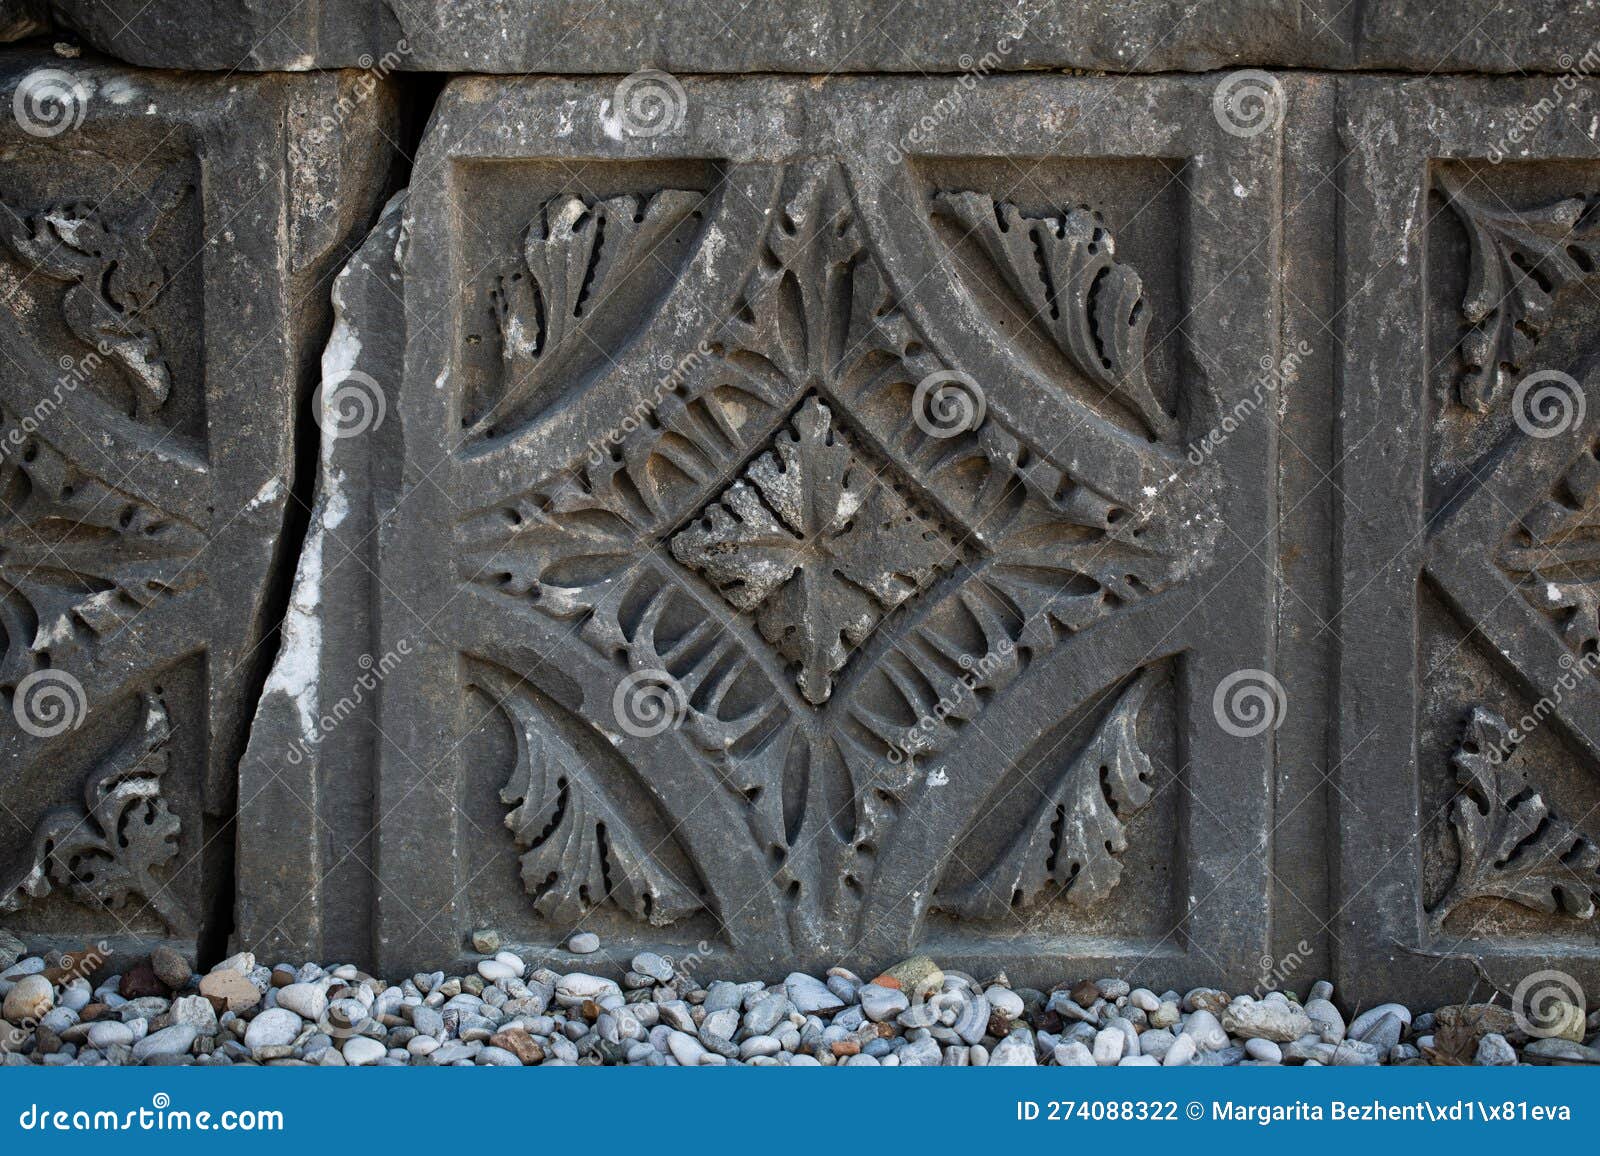 closeup view of decorative s of roman architecture of vast remains.